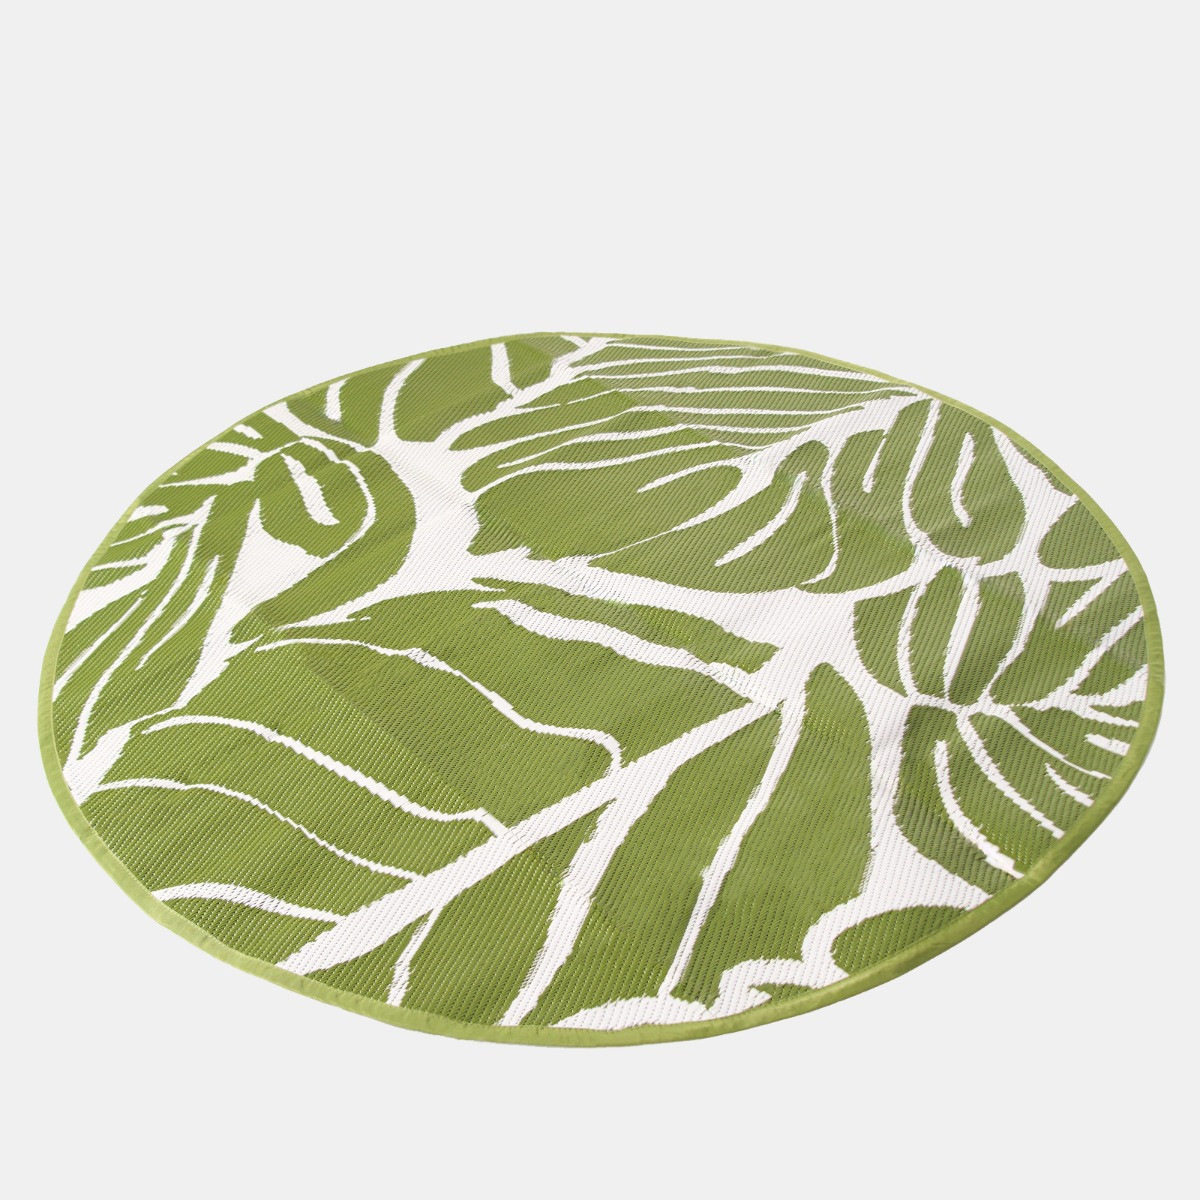 OHS Circle Tropical Print Outdoor Rug, Green/White - 170cm>